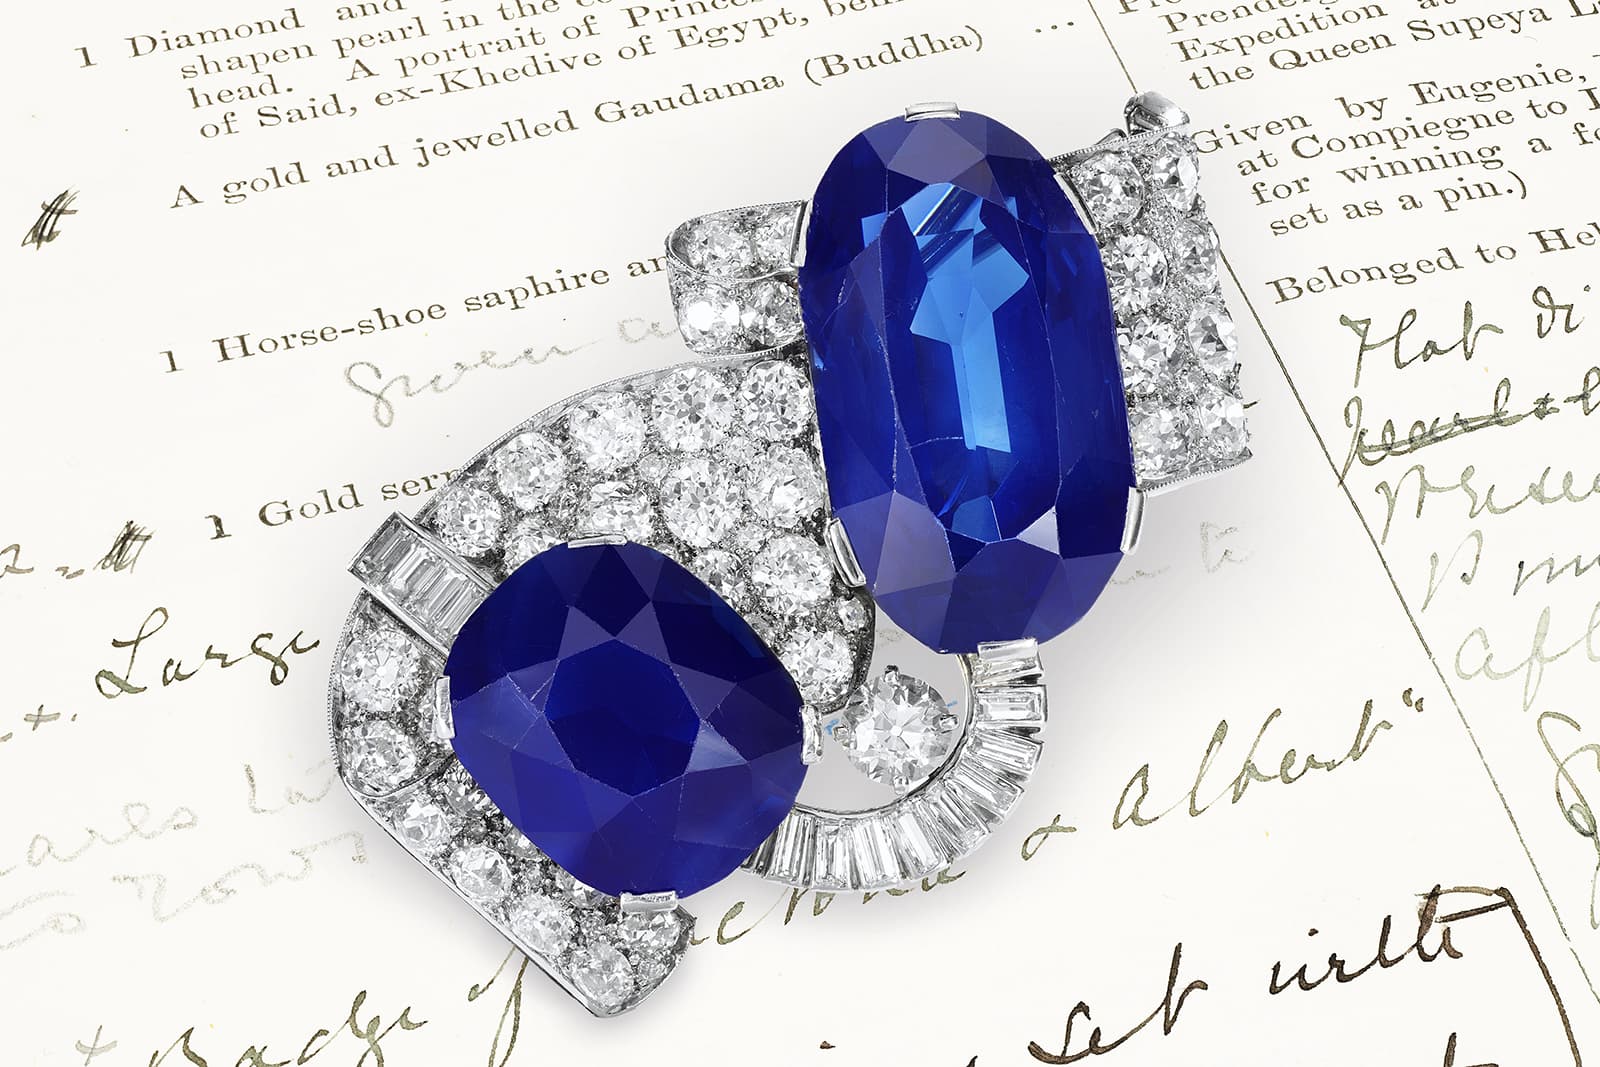 The largest Kashmir sapphire ever to appear at auction – a 1930s sapphire and diamond brooch featuring a 55.19 carat oval gem alongside a cushion-shaped Kashmir sapphire weighing 25.97 carats – will be sold by Sotheby’s at its Magnificent Jewels auction in Geneva in May 2021